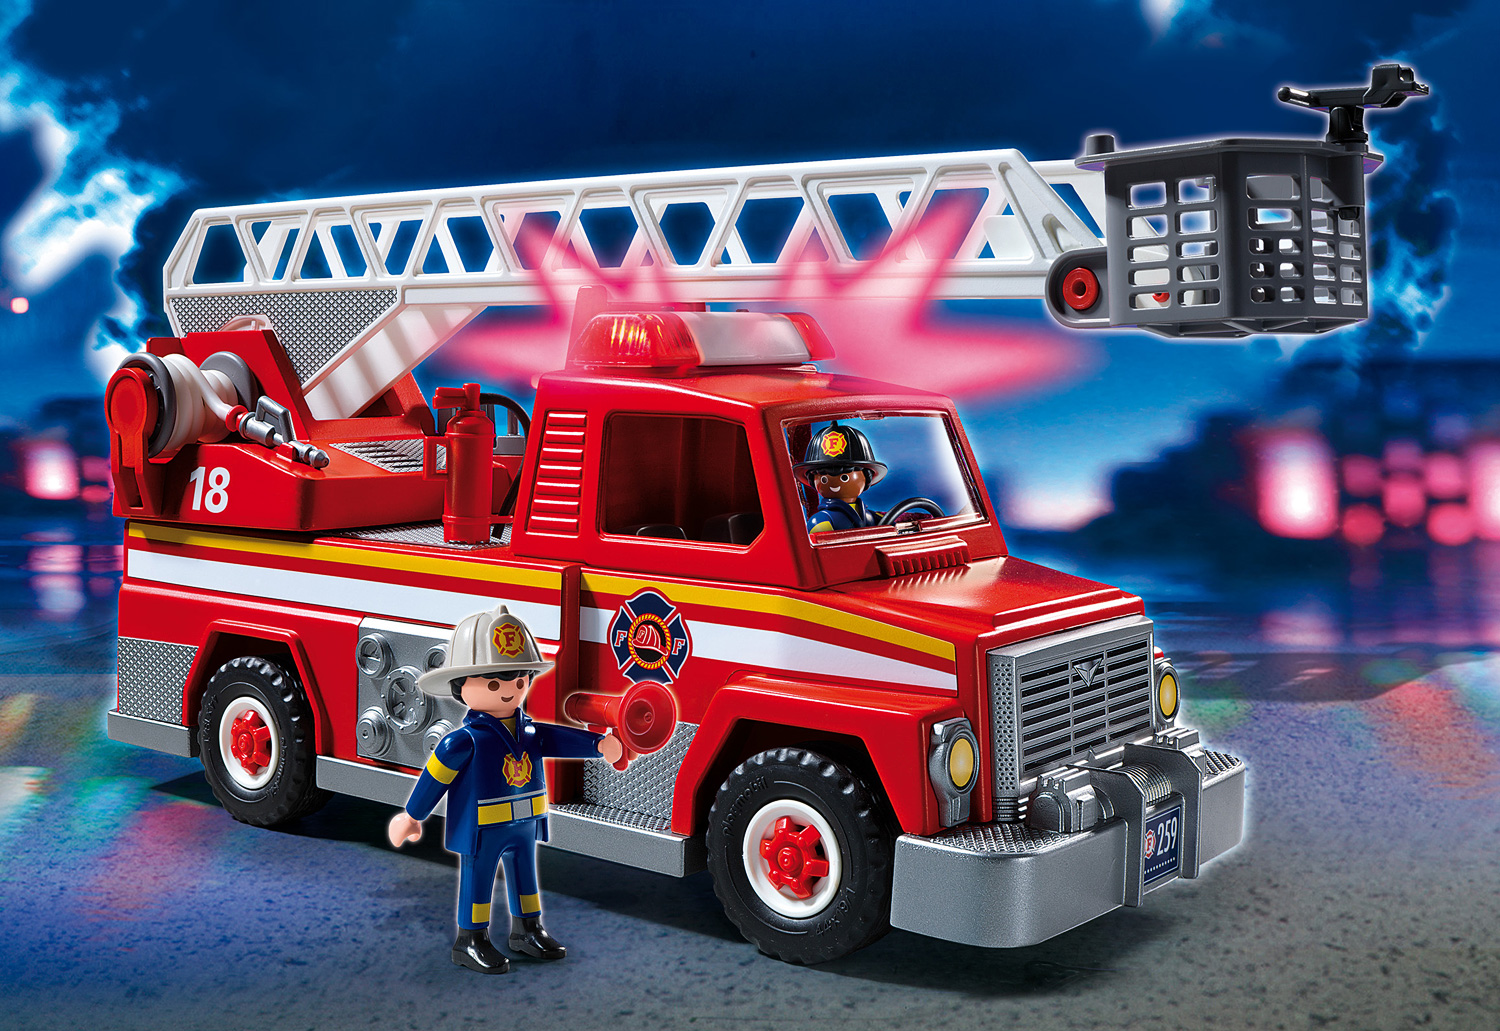 Playmobil - City action rescue ladder - Givens Books and Little Dickens